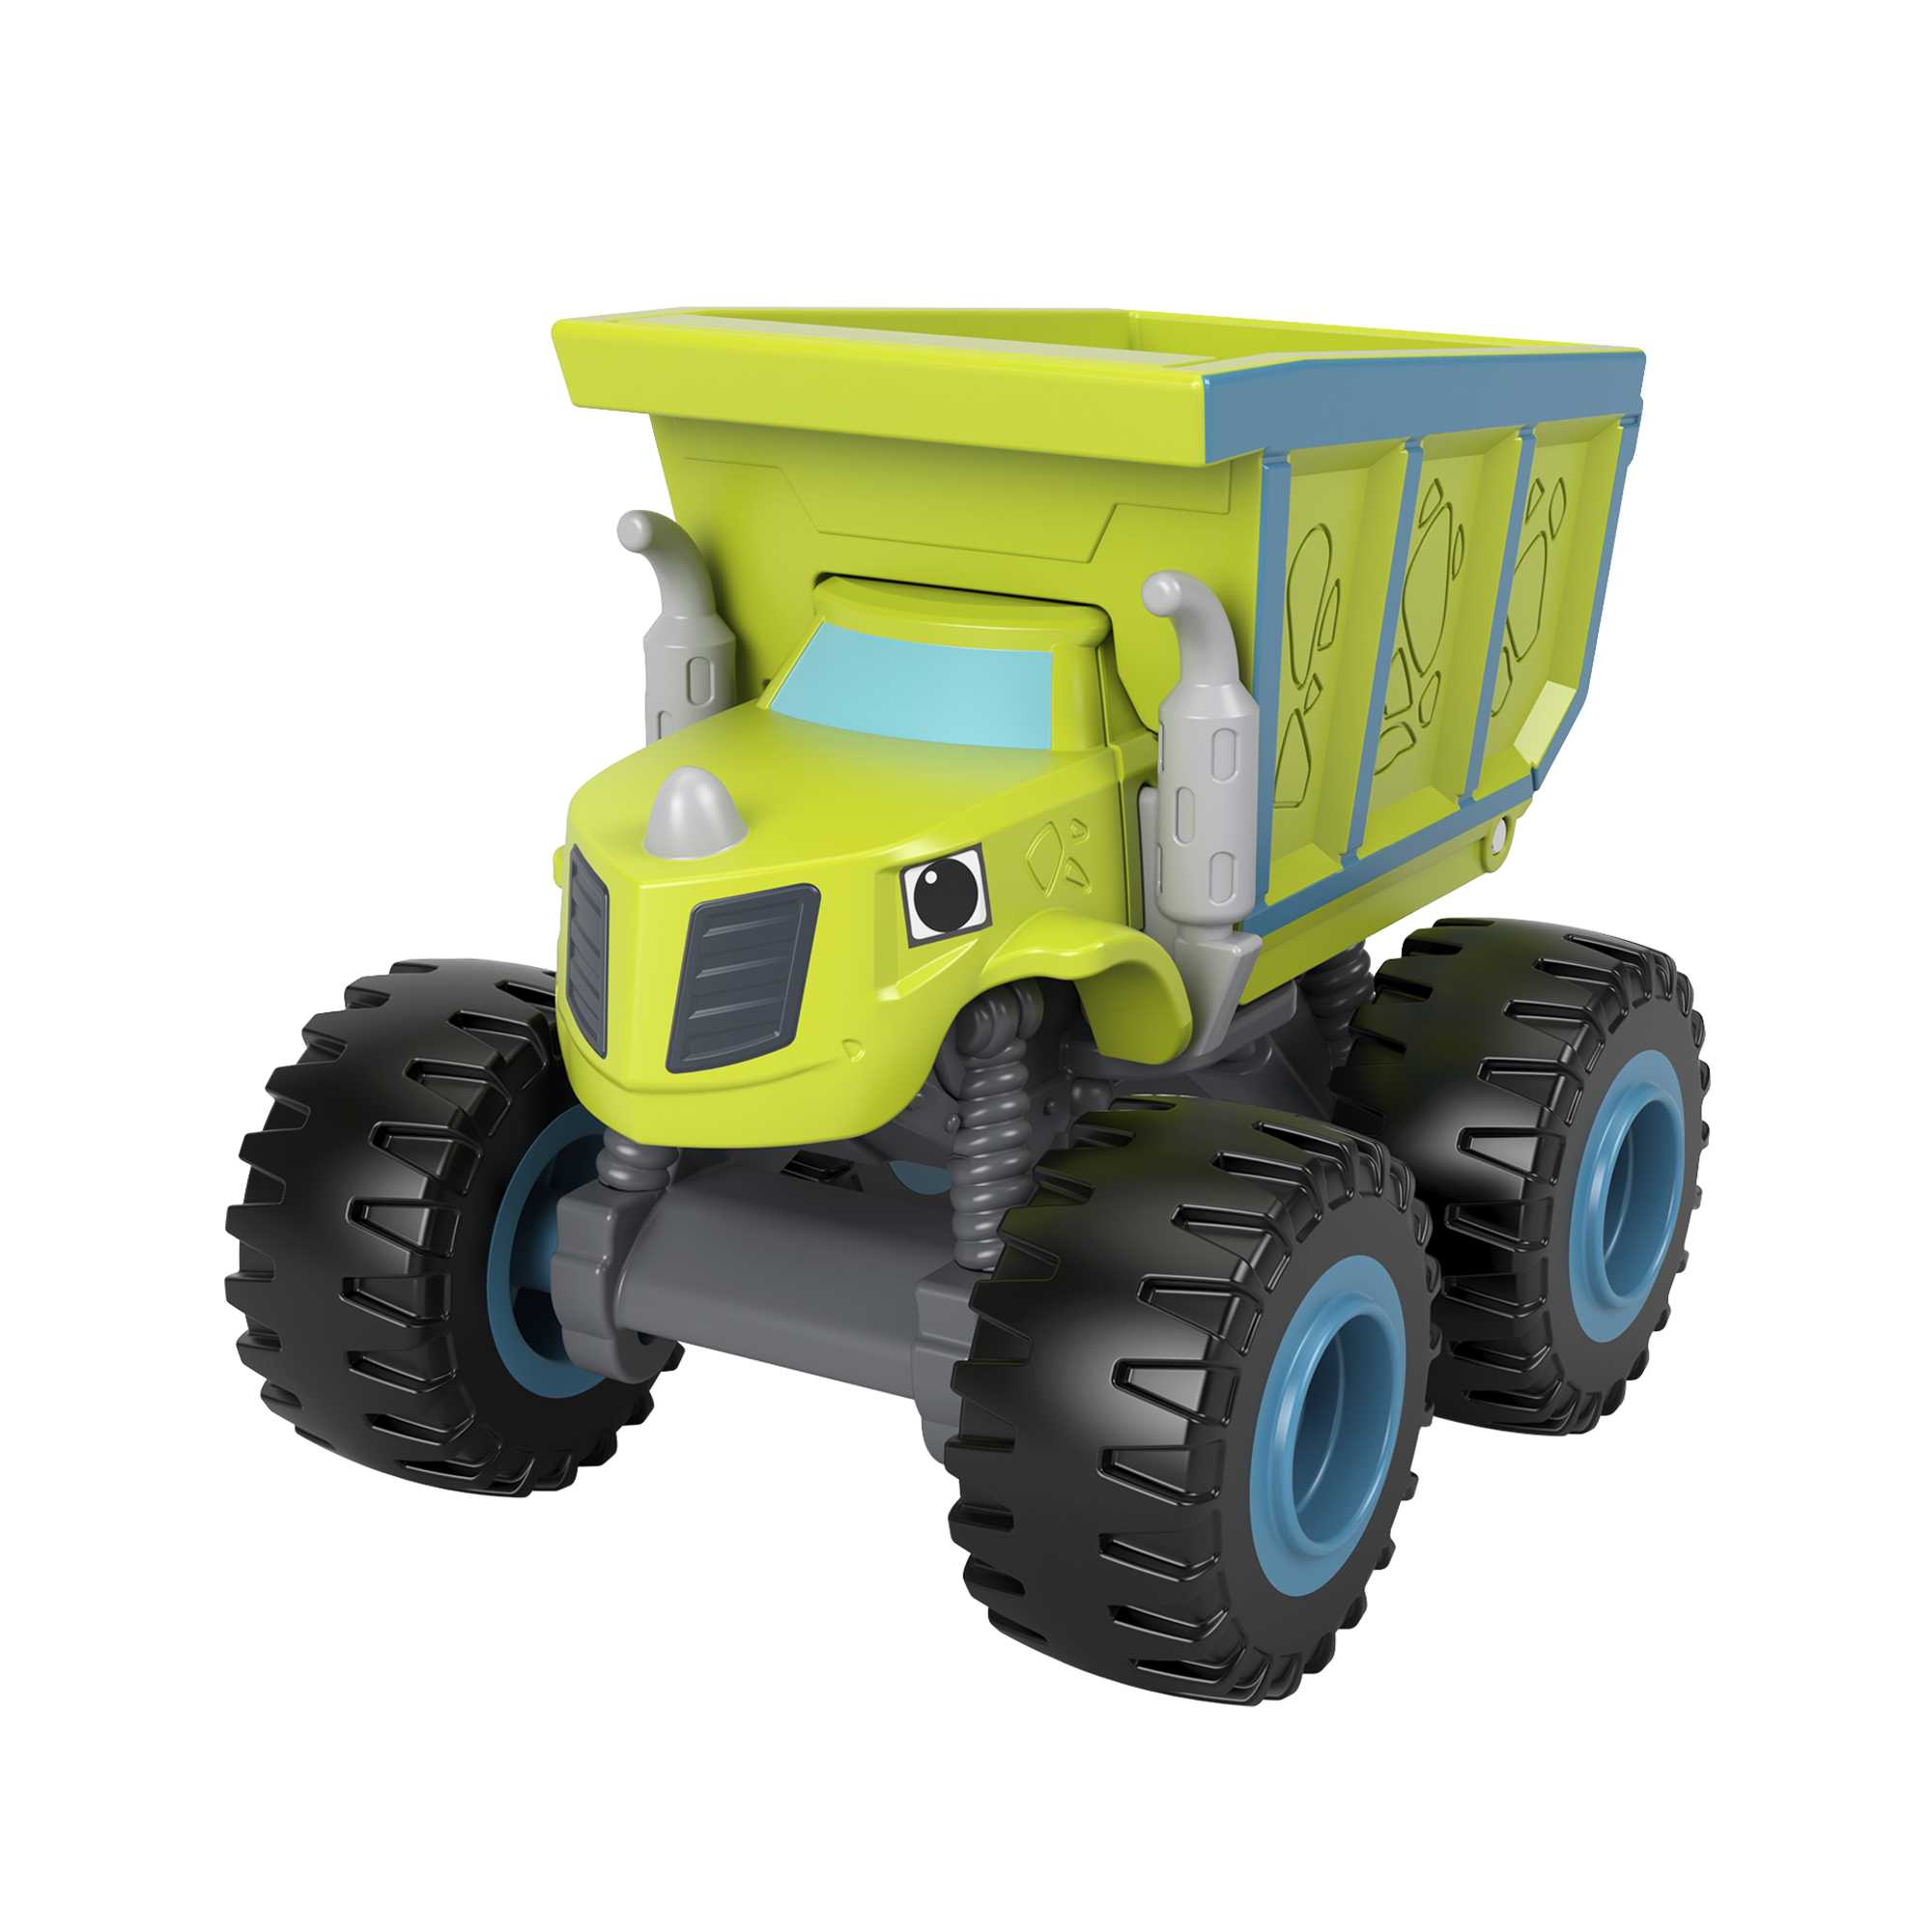 Blaze and the Monster Machines - The Little Seedling